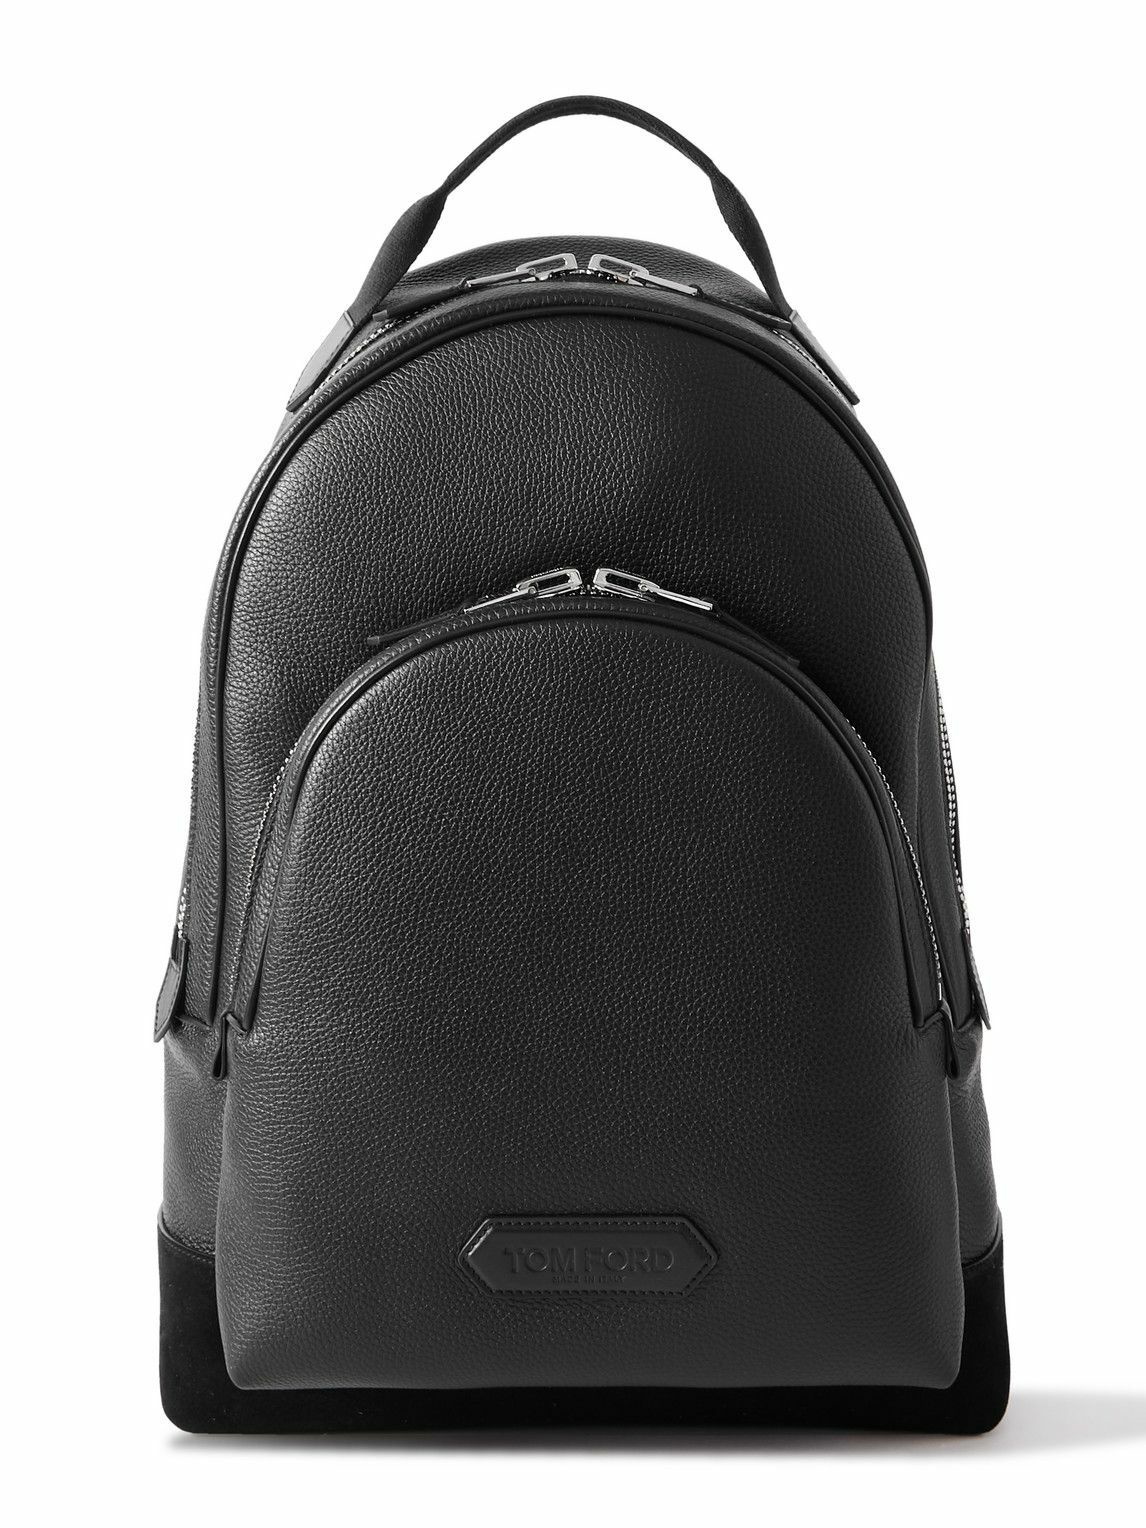 TOM FORD - Suede-Trimmed Full-Grain Leather Backpack TOM FORD